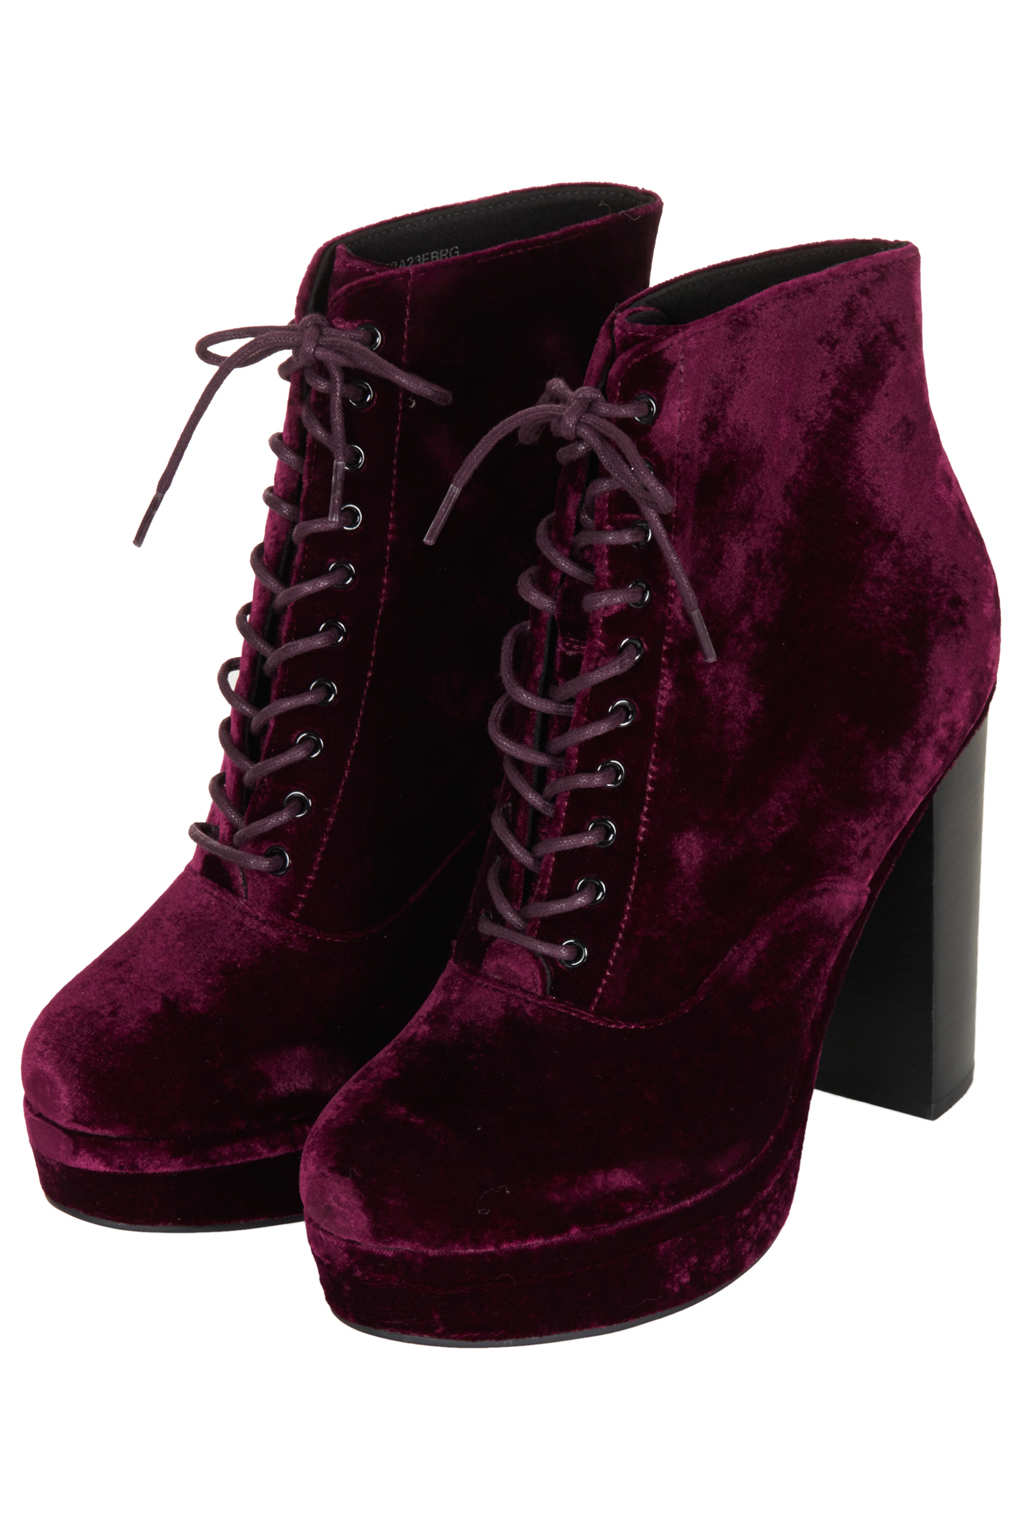 Lyst - Topshop Alpy Velvet Lace Up Boots in Purple